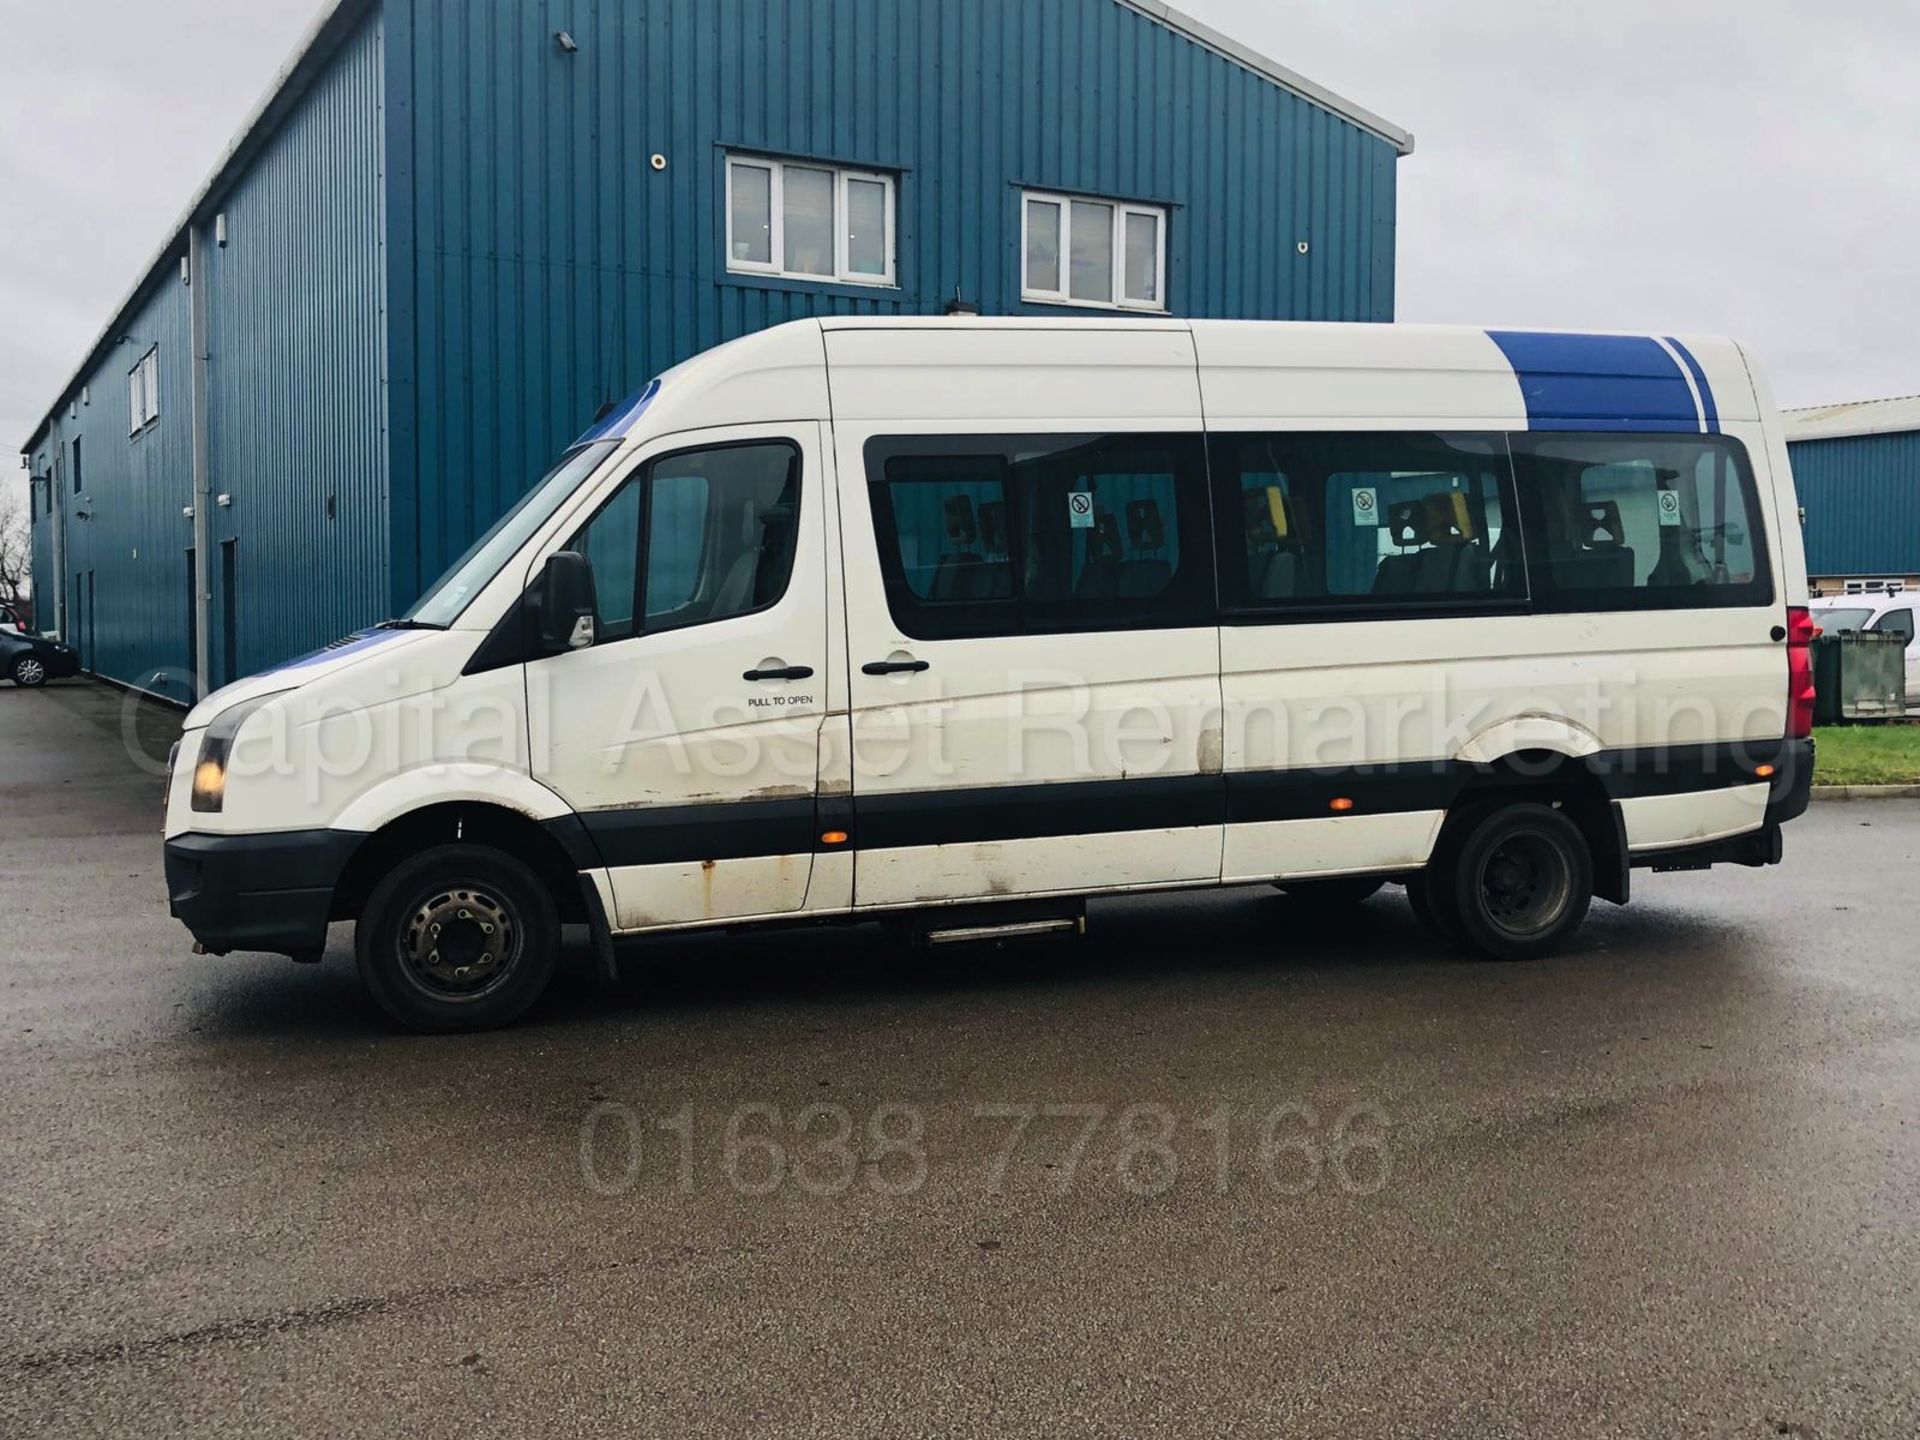 VOLKSWAGEN CRAFTER 2.5 TDI *LWB - 16 SEATER MINI-BUS / COACH* (2007) *ELECTRIC WHEEL CHAIR LIFT* - Image 3 of 30